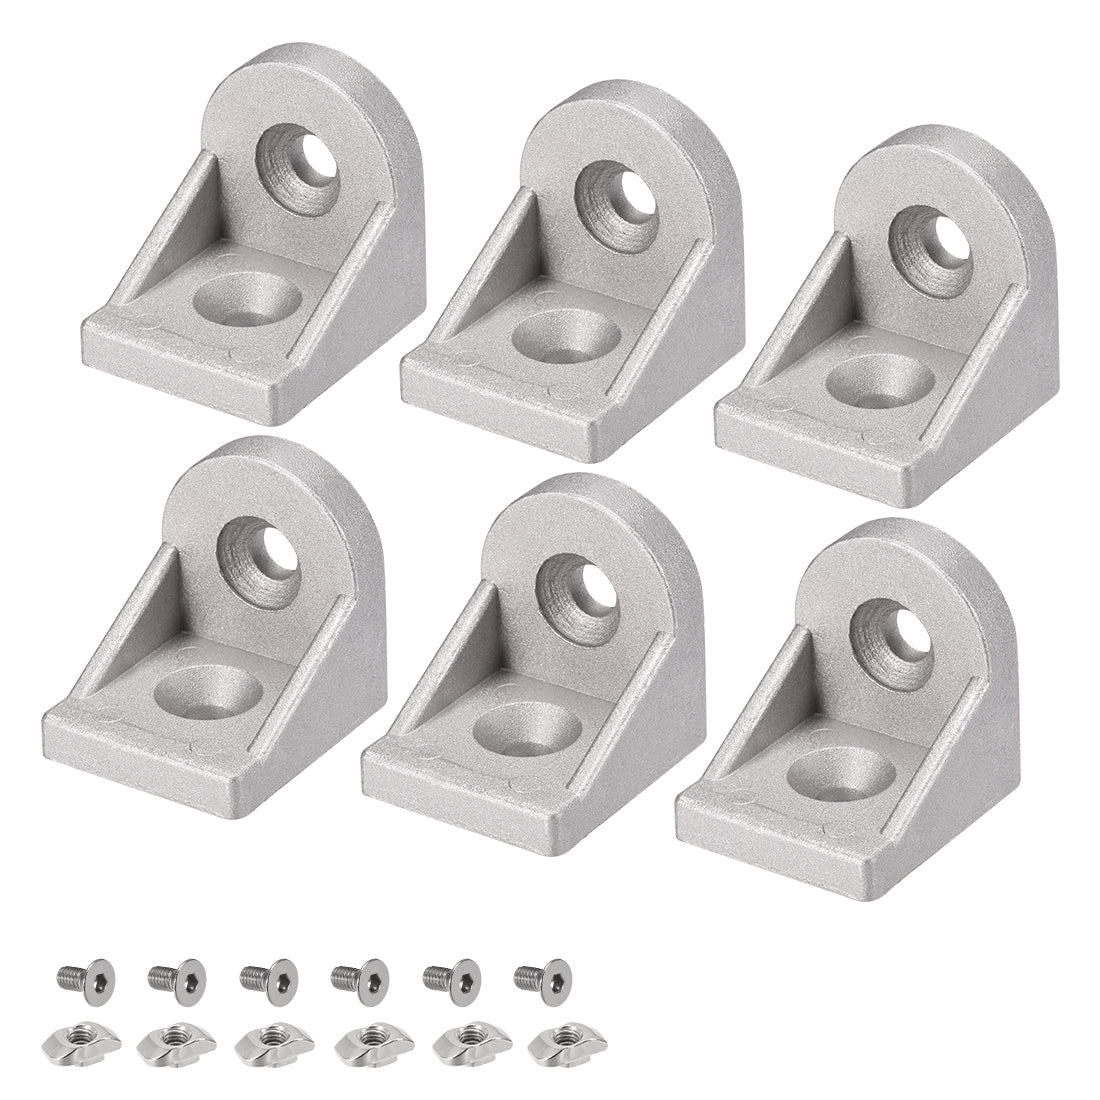 uxcell Uxcell Angle Arbitrary Bracket Set, Corner L Connector for 4040 Series Aluminum Extrusion Profile with Slot 8mm, 6 Pcs